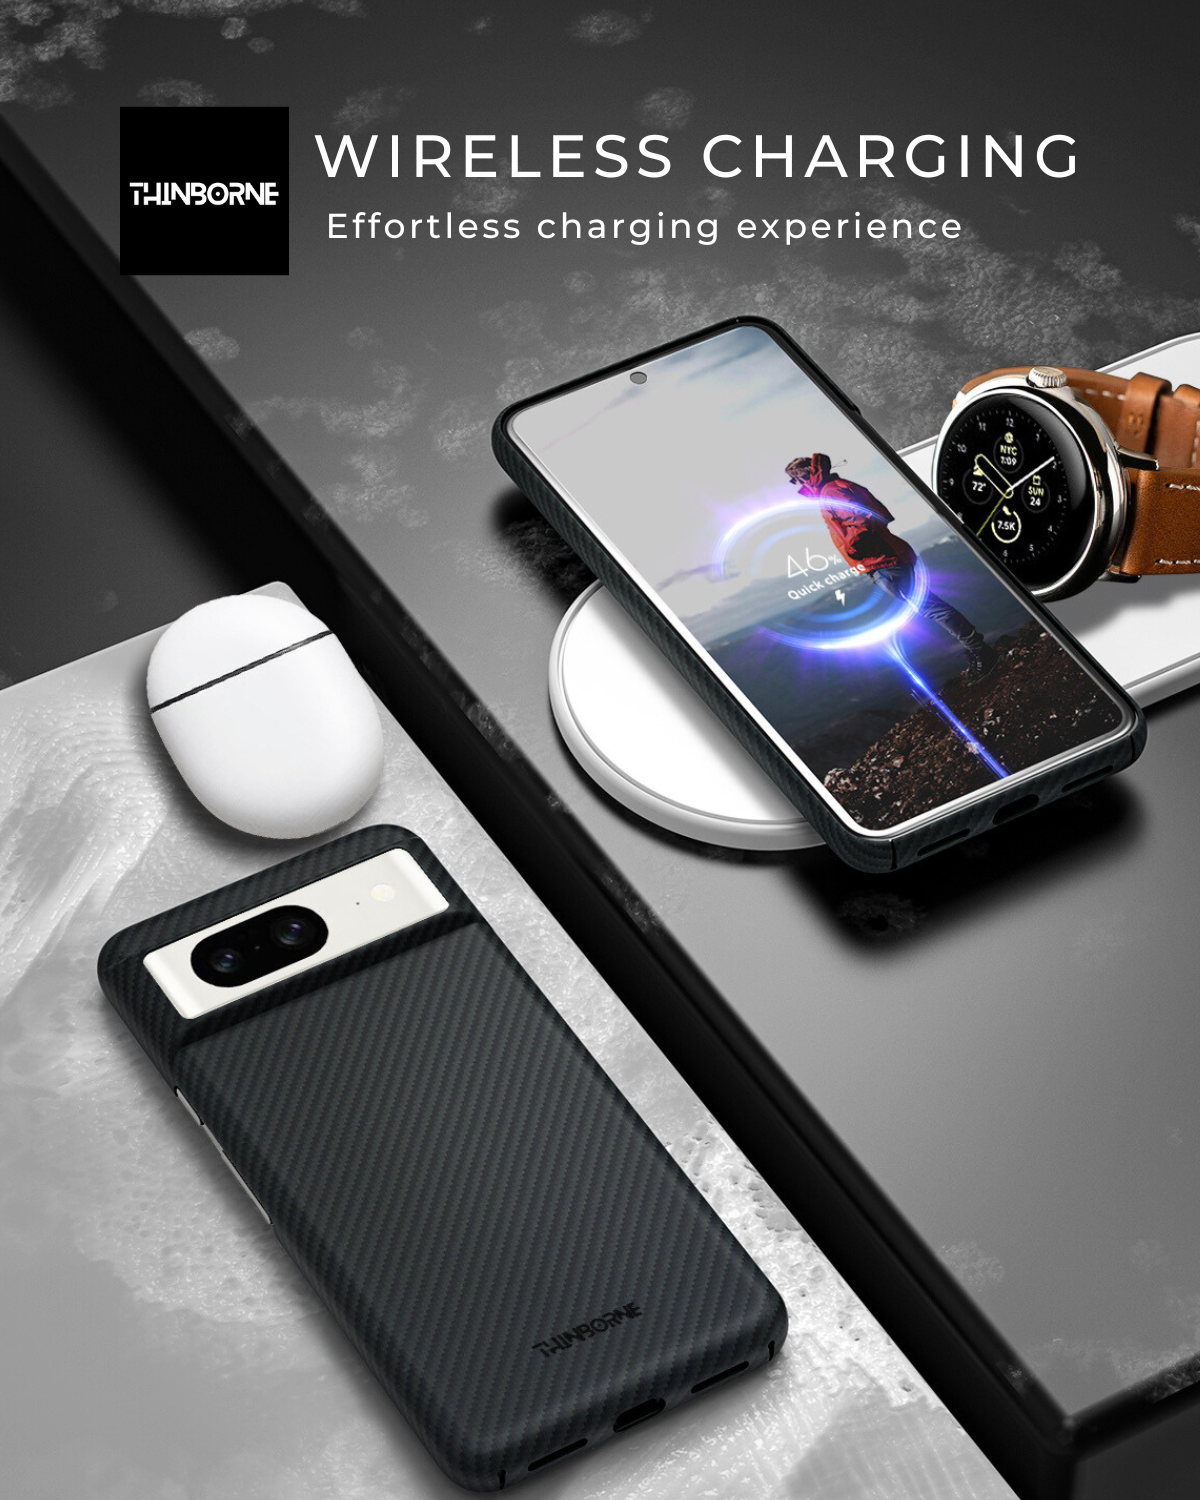 pixel 8 in aramid fiber cases showing wireless charging capacity